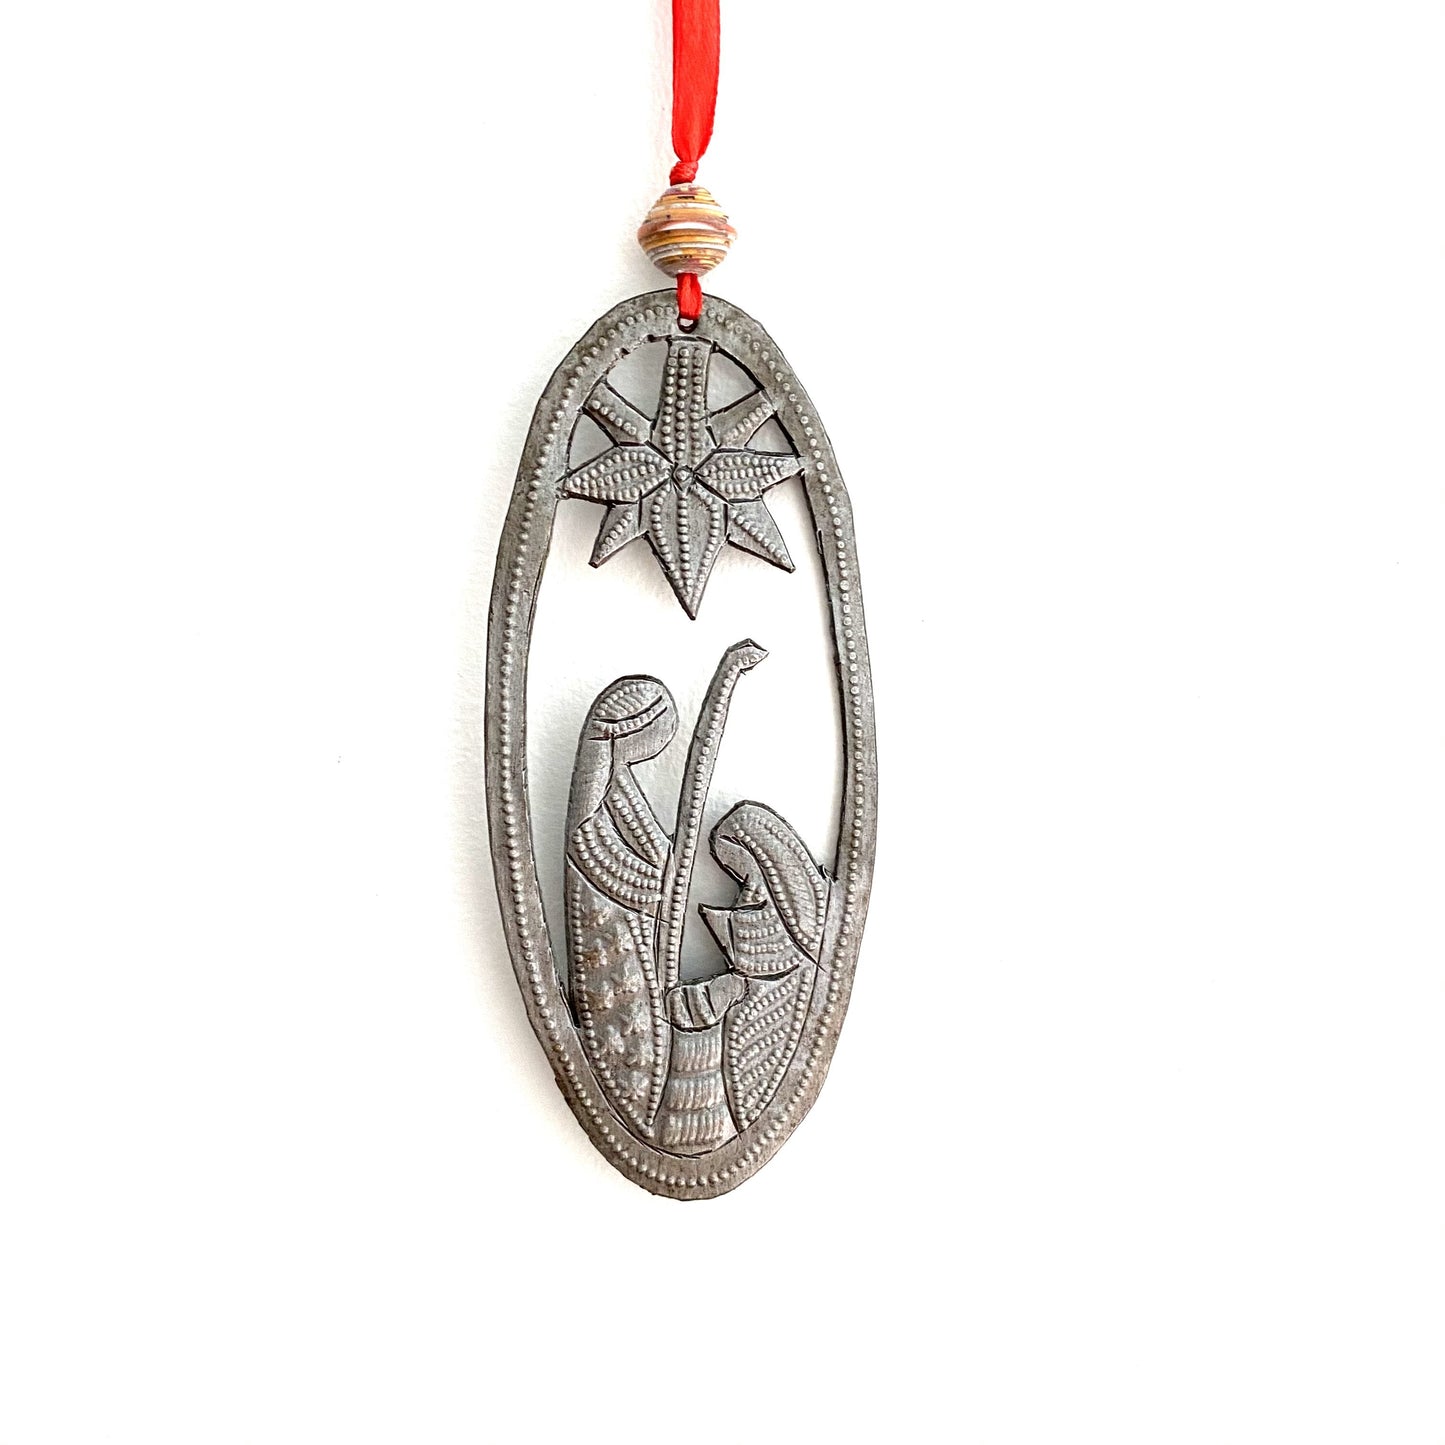 Oval Hanging Nativity Ornament